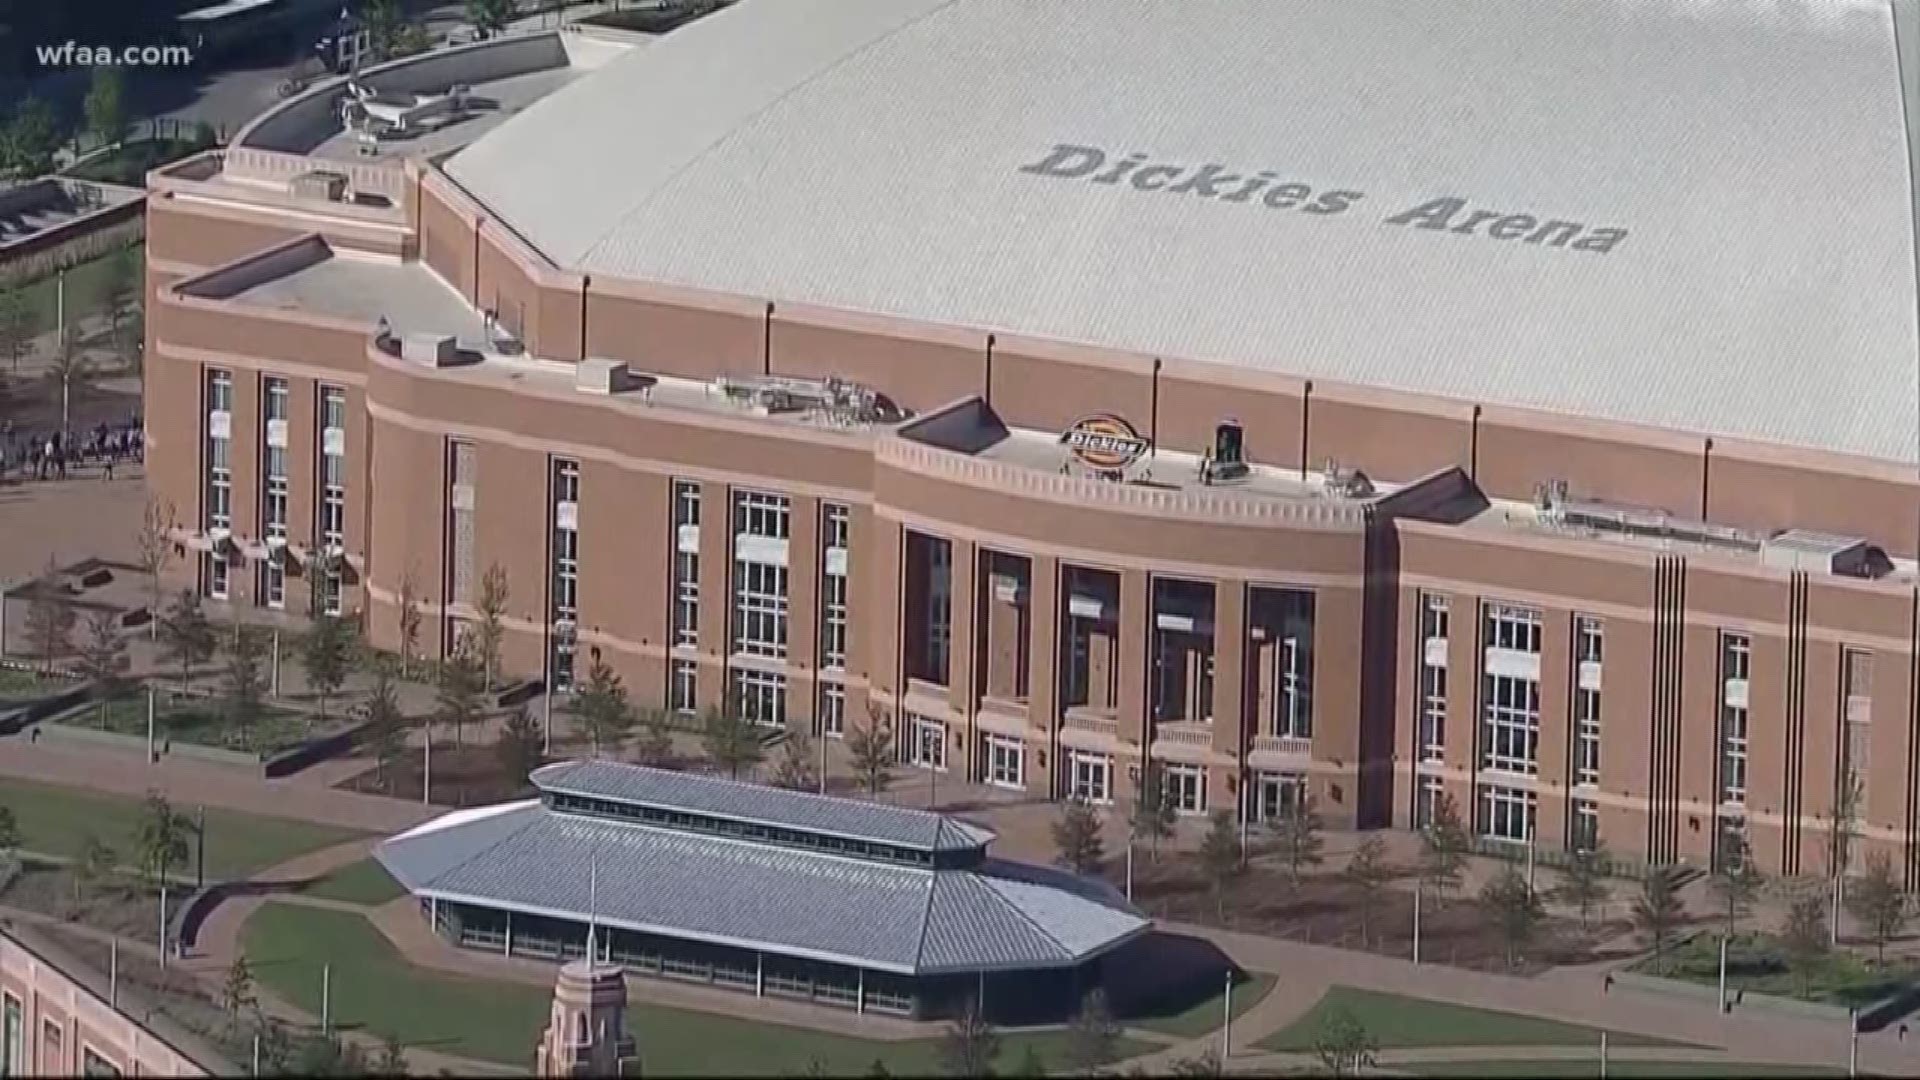 Rodeo organizers say the reason for the uptick in ticket sales is obvious: this is the first year the Fort Worth rodeo is being held in the brand-new Dickies Arena.